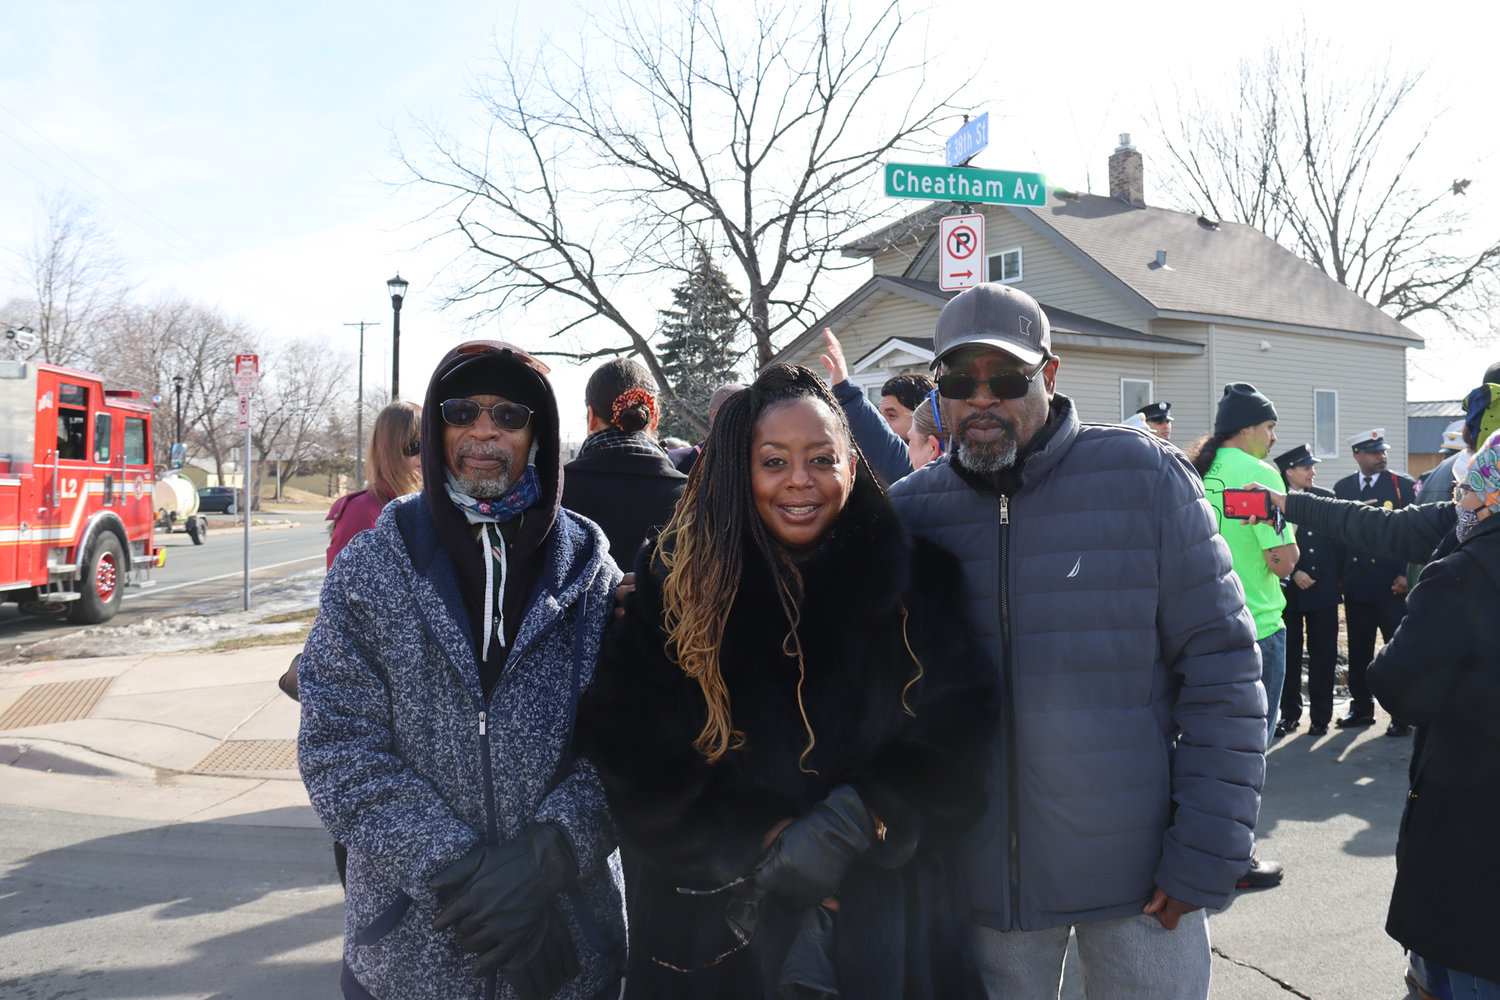 St. James AME Church historian Larry Burt, at left, stated, “It’s a relief to go from villain to hero.” With him are Reverend Dr. Tracey Gibson (center) and Stephen Dye. (Photo by Tesha M. Christensen)